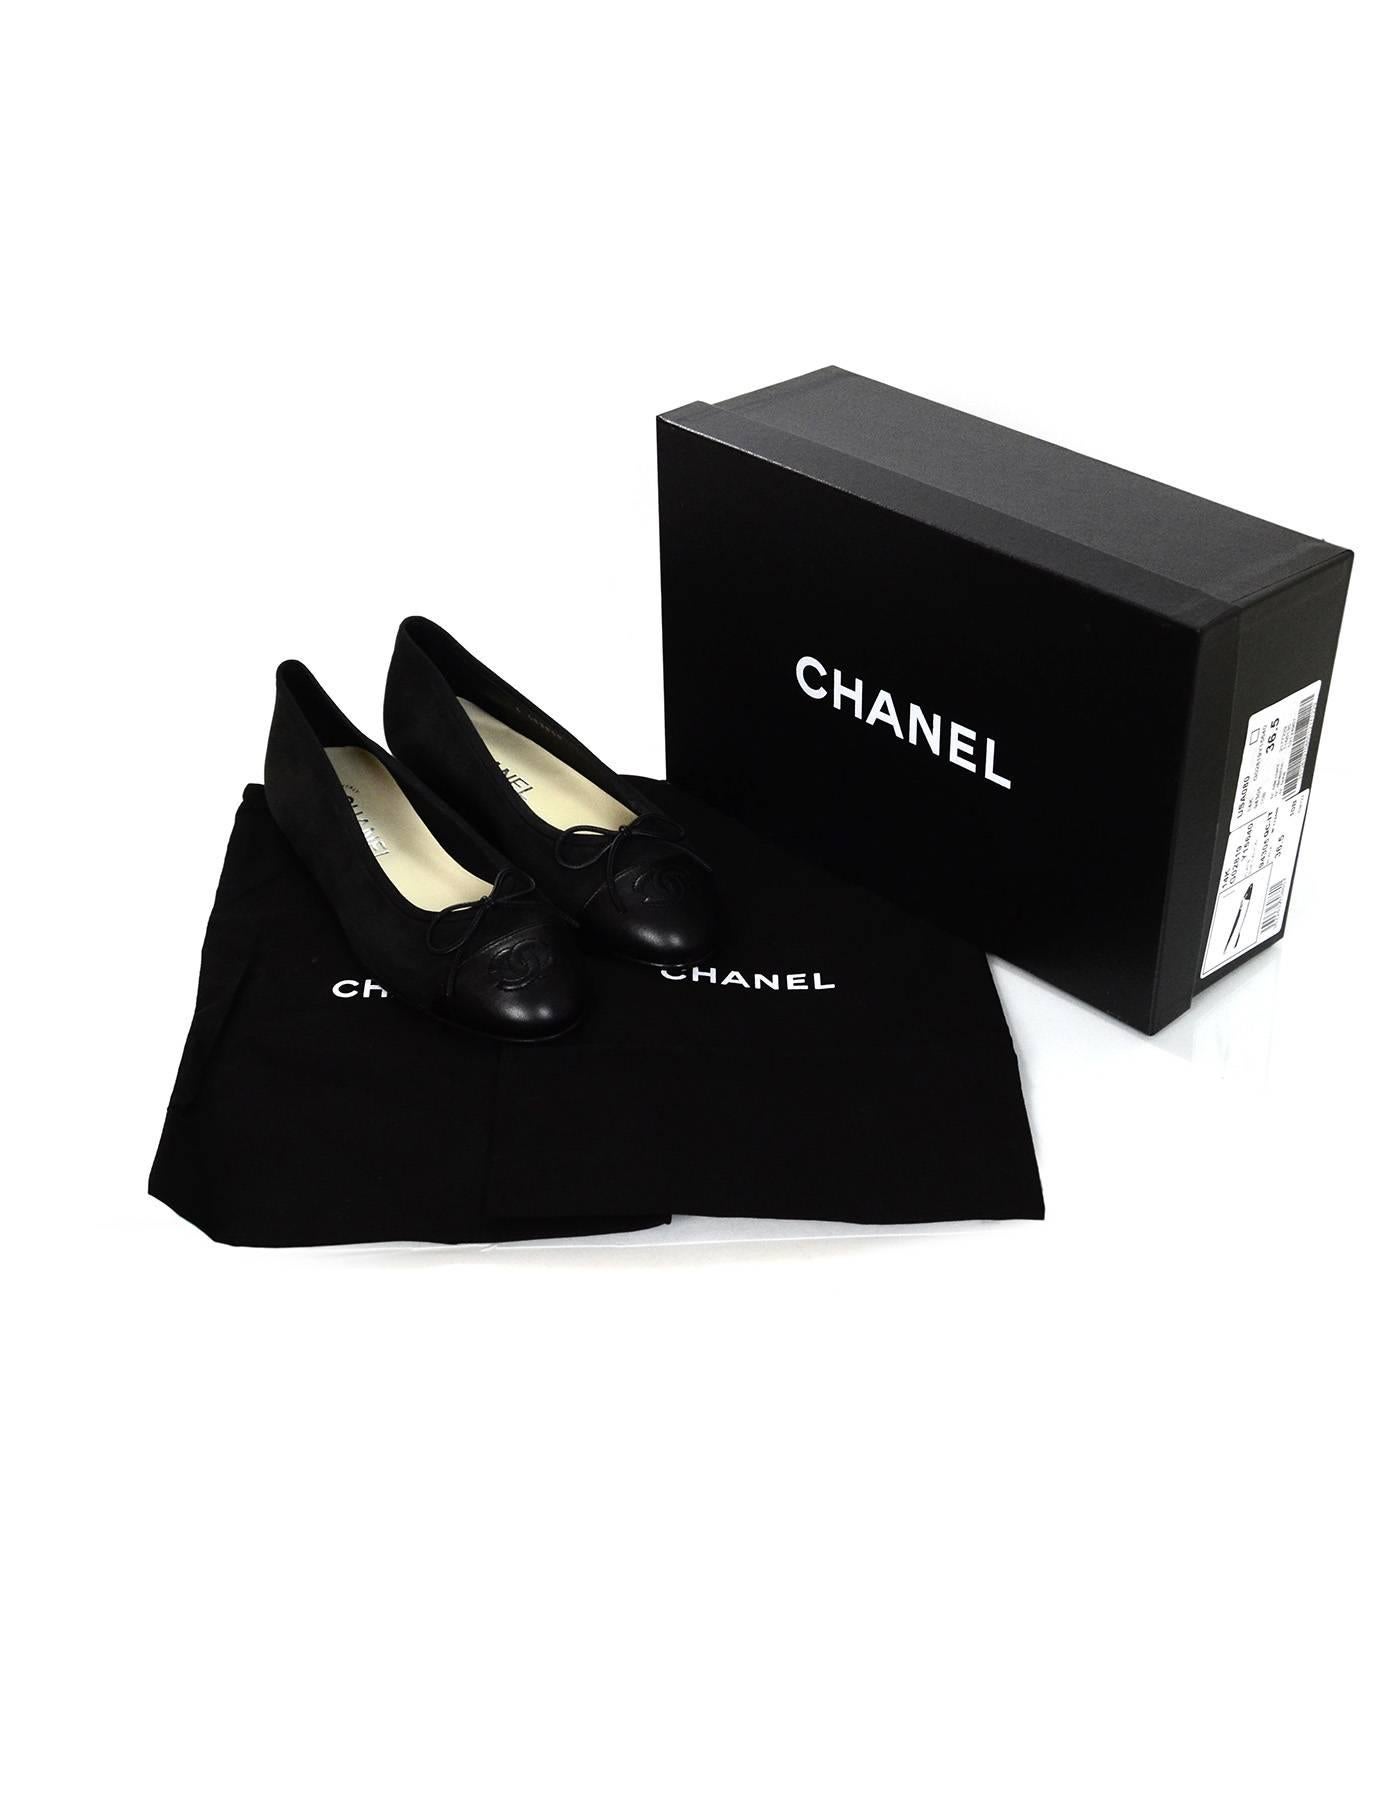 Chanel NEW IN BOX Black Suede Ballet Flats Sz 36.5  2